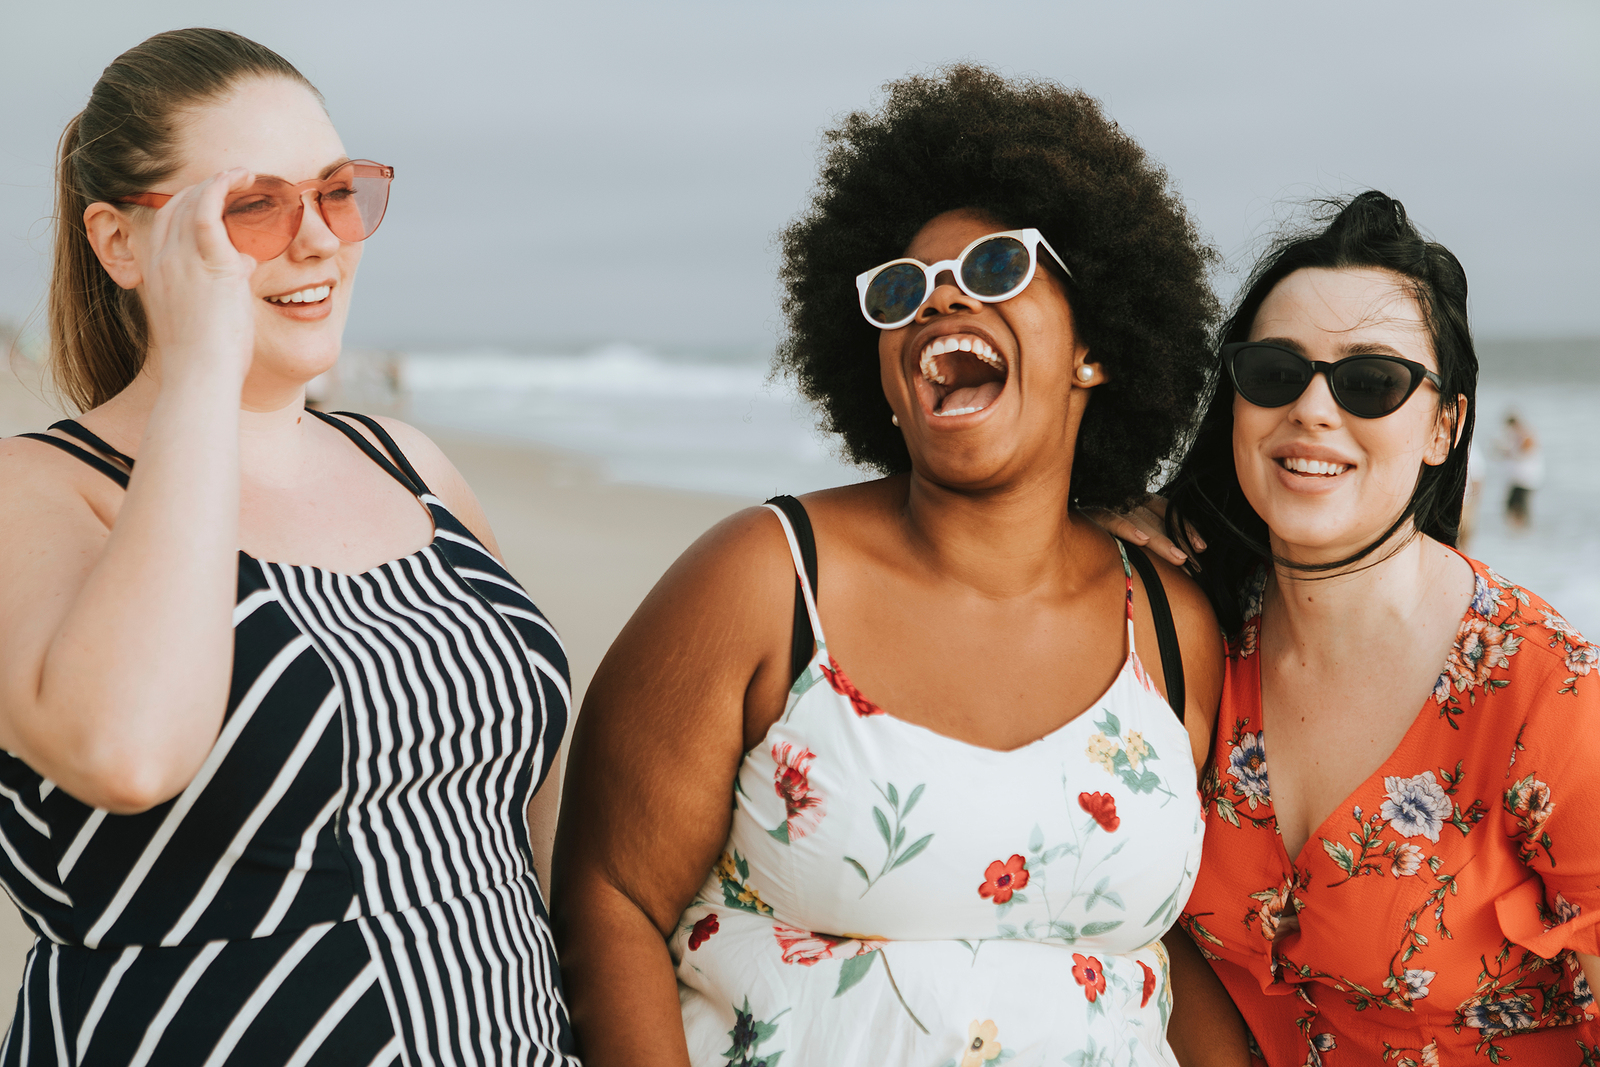 Image of 3 curvy and attractive friends of mixed ethnicities, all wearing floral dresses and sunglasses , walking side by side laughing together.